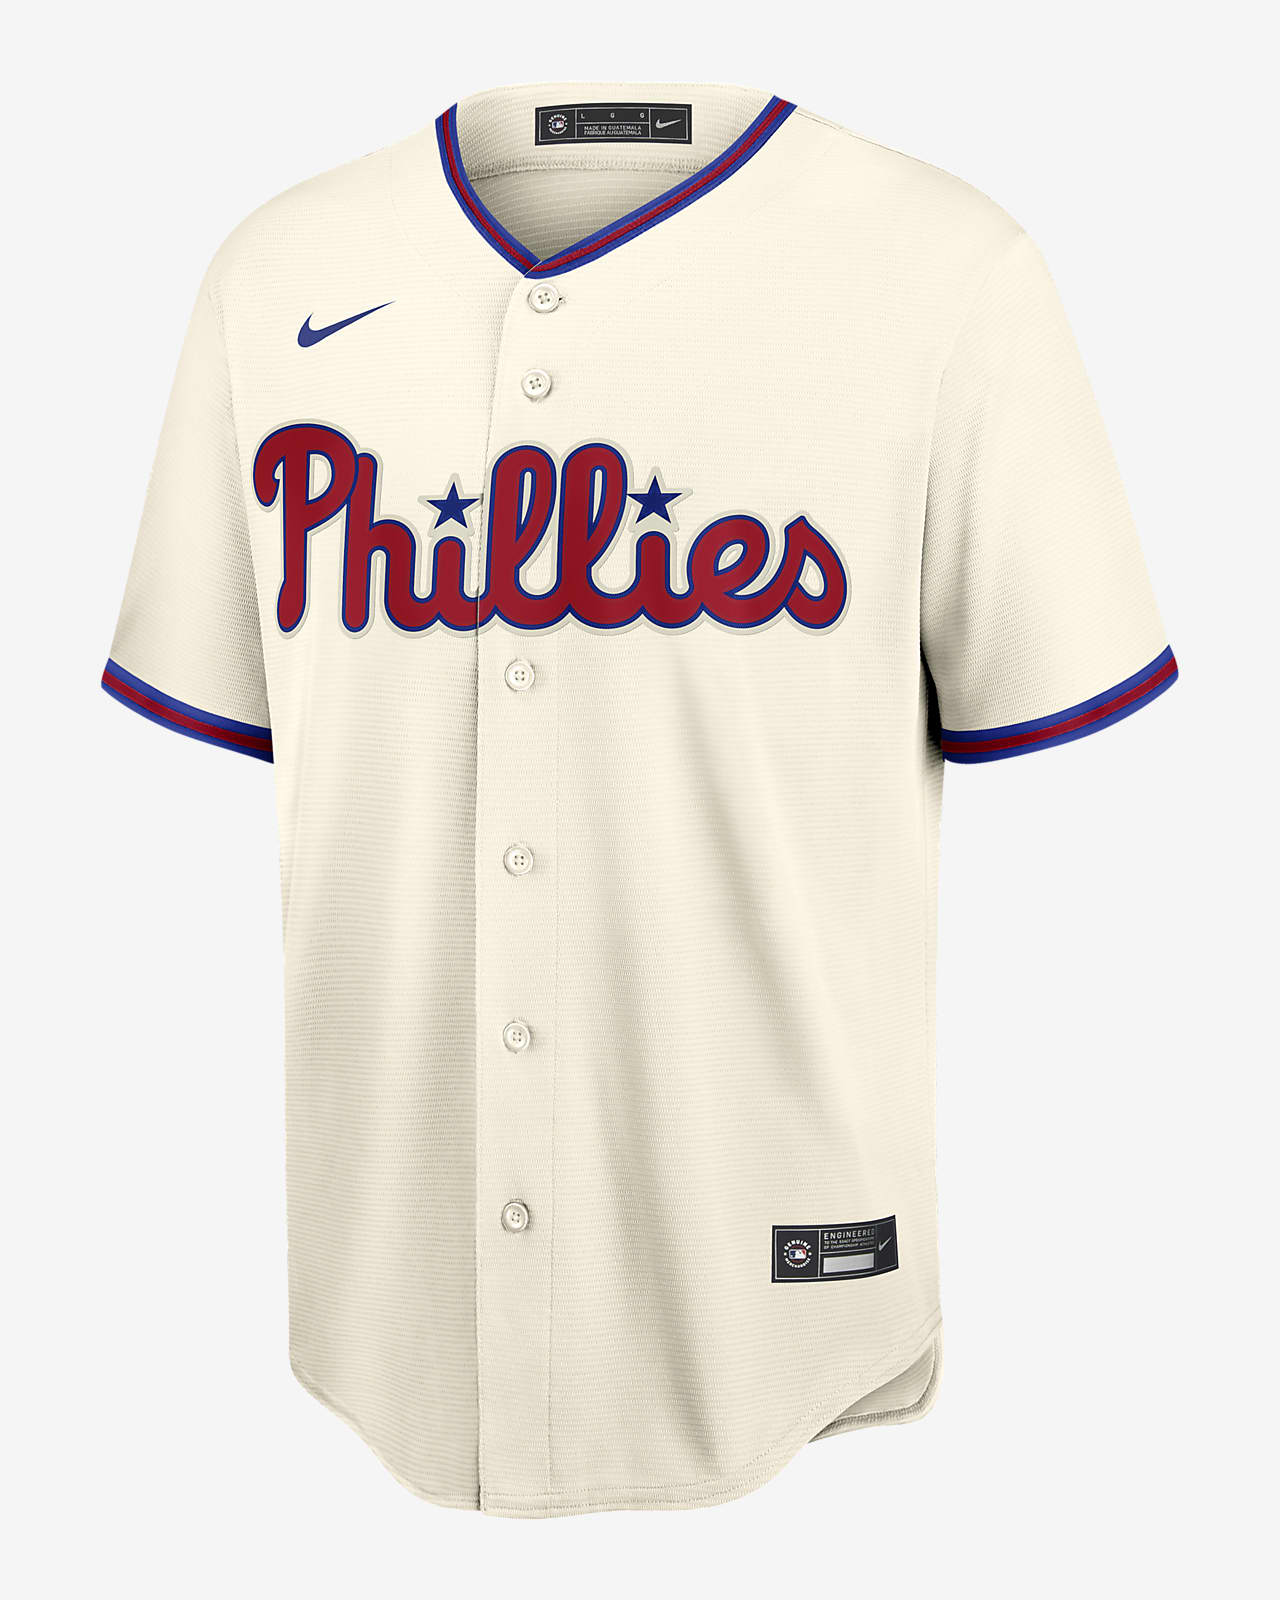 real phillies jersey